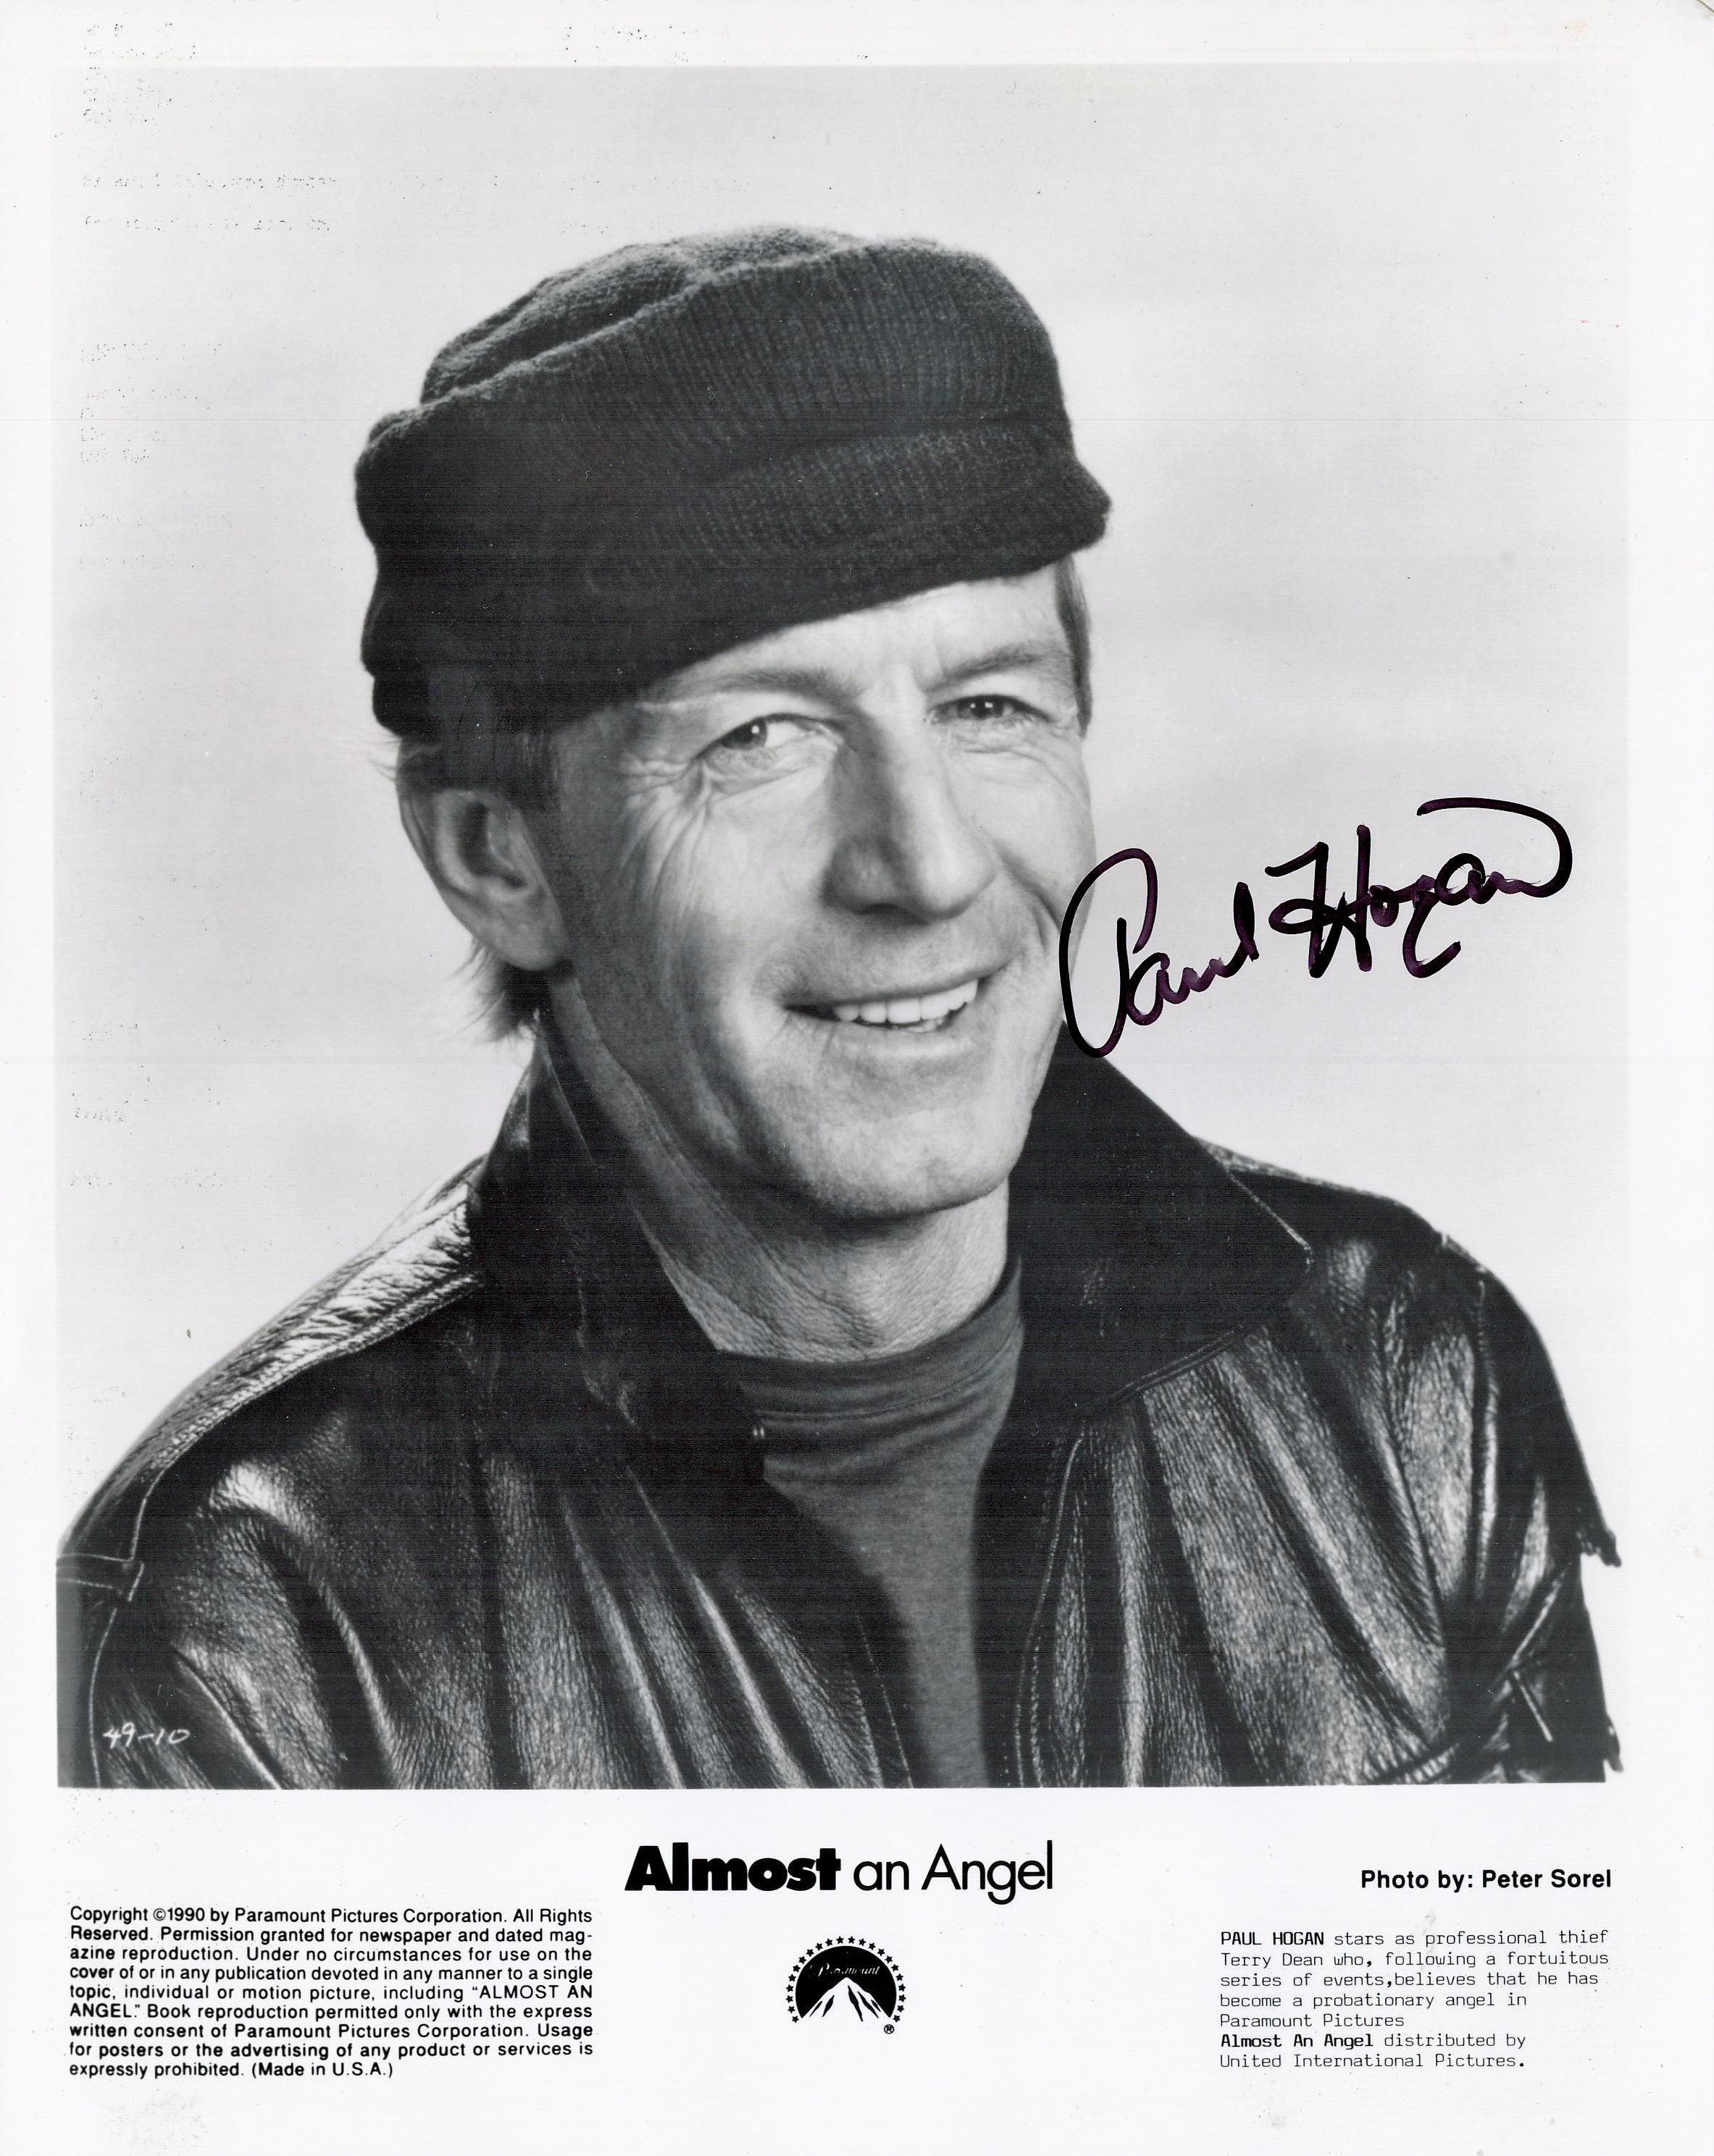 Paul Hogan Actor Signed Almost An Angel 8x10 Promo Photo £25-30. Good condition. All autographs come